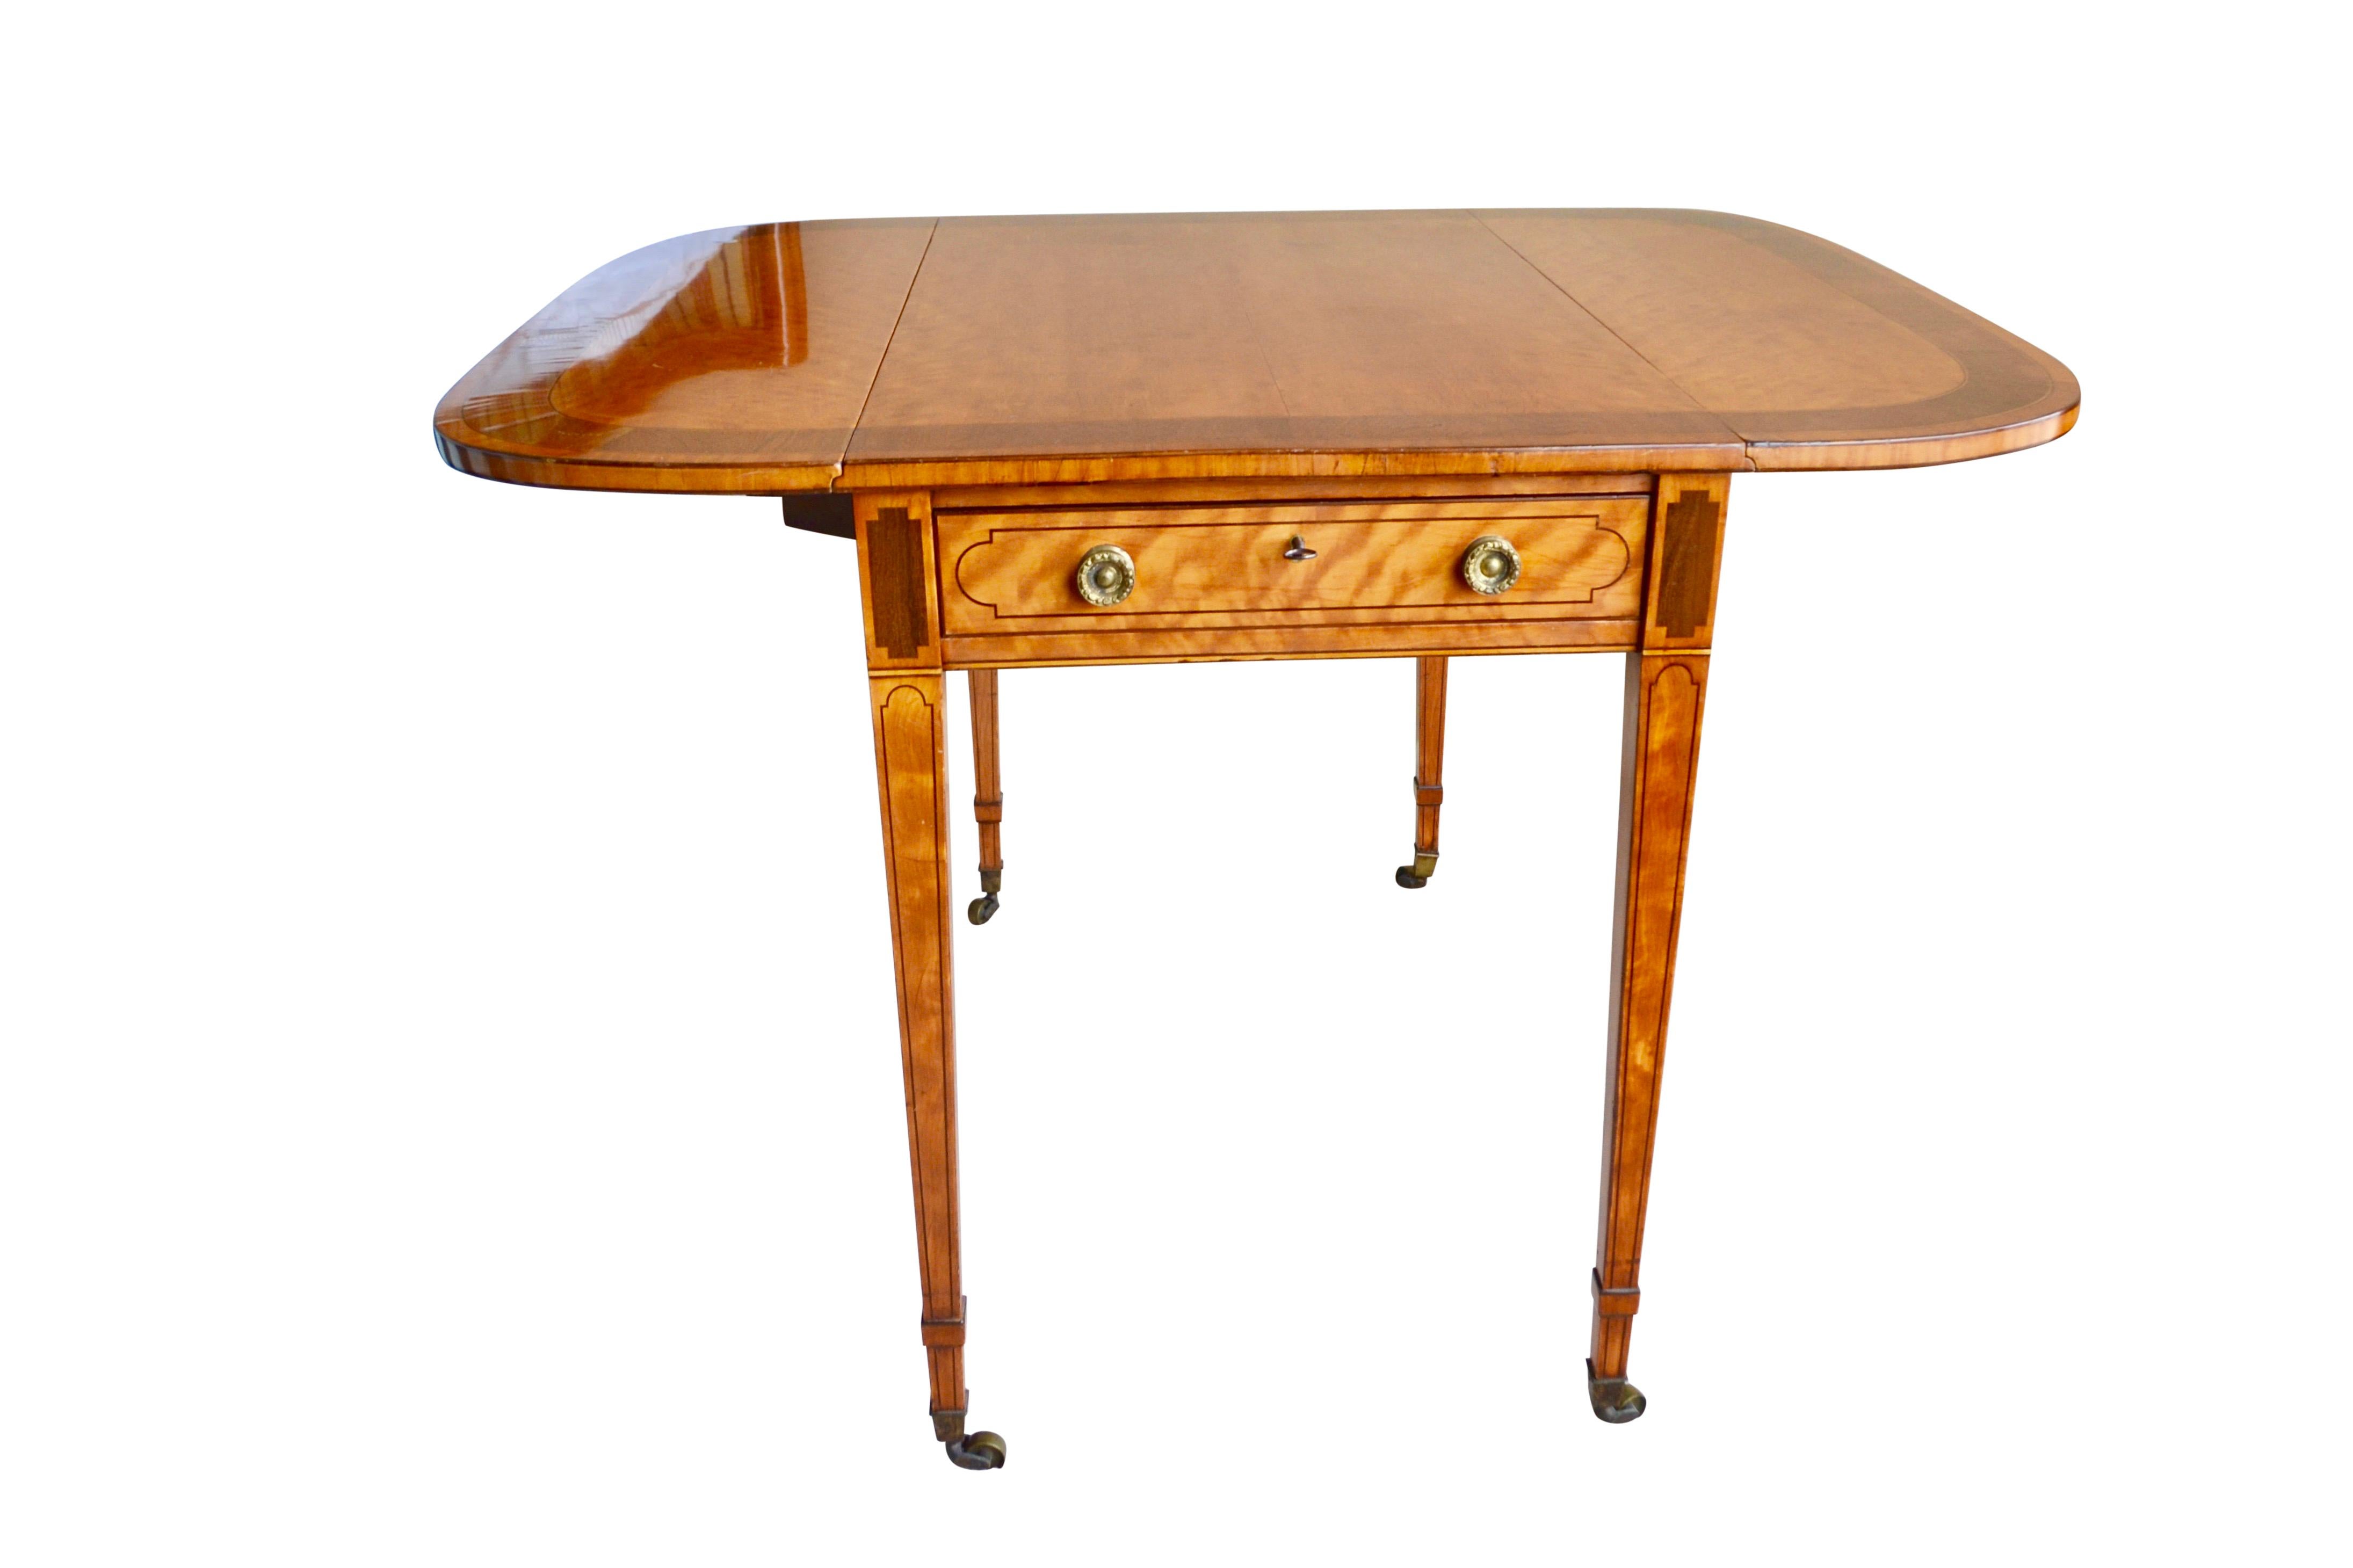 A Classic Georgian English Pembroke table with a single drawer to one side with lock and flaps on either side that can be raised by brackets on hinges (known as “elbows”) to increase its Size. The table is raised on tapered rectangular legs with